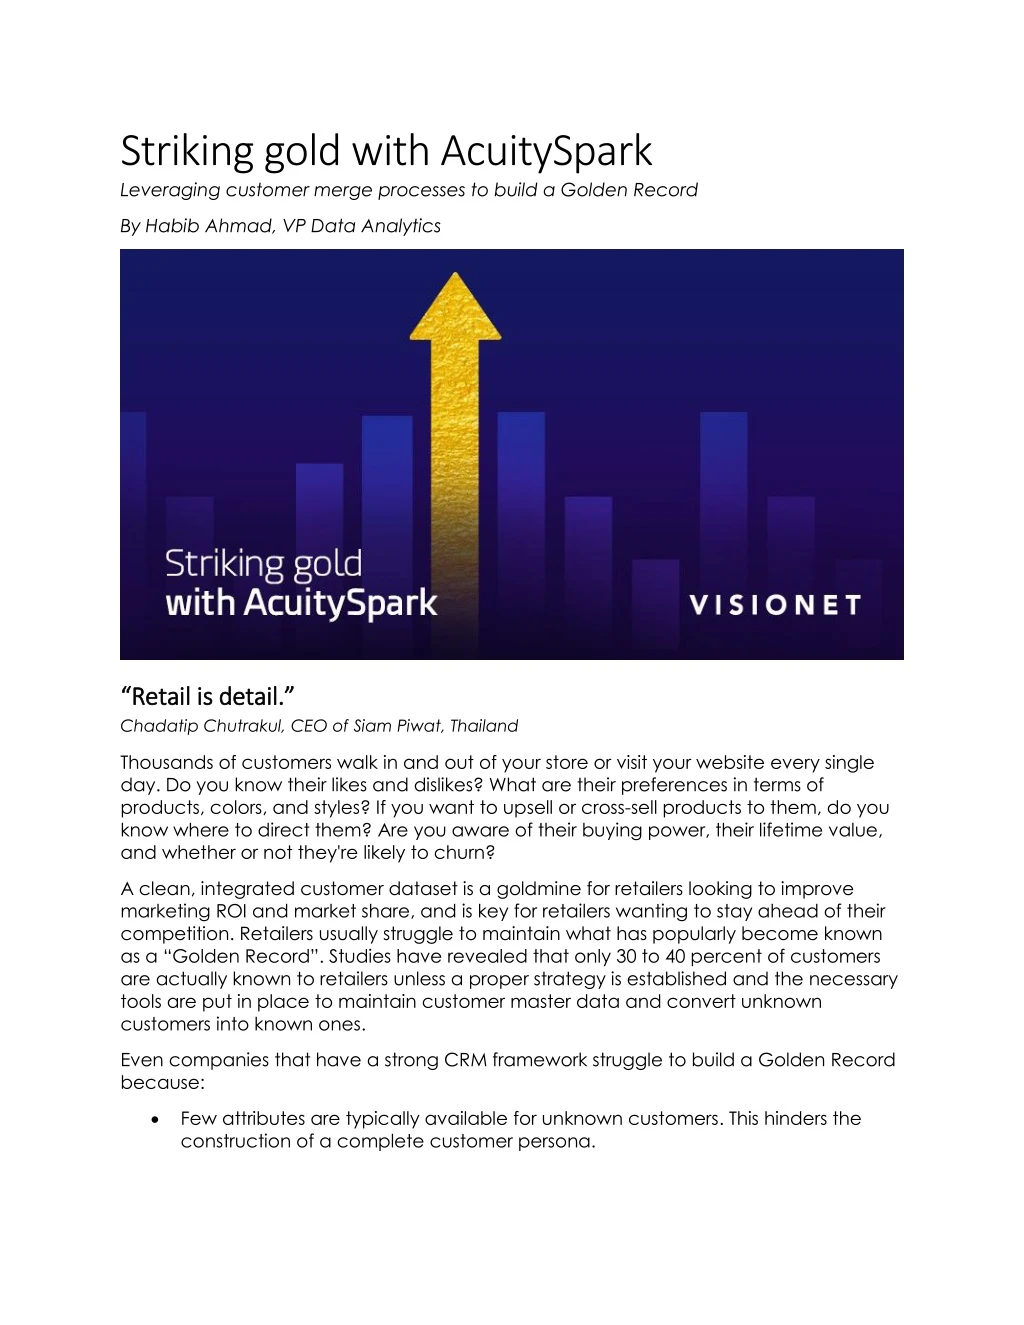 striking gold with acuityspark leveraging